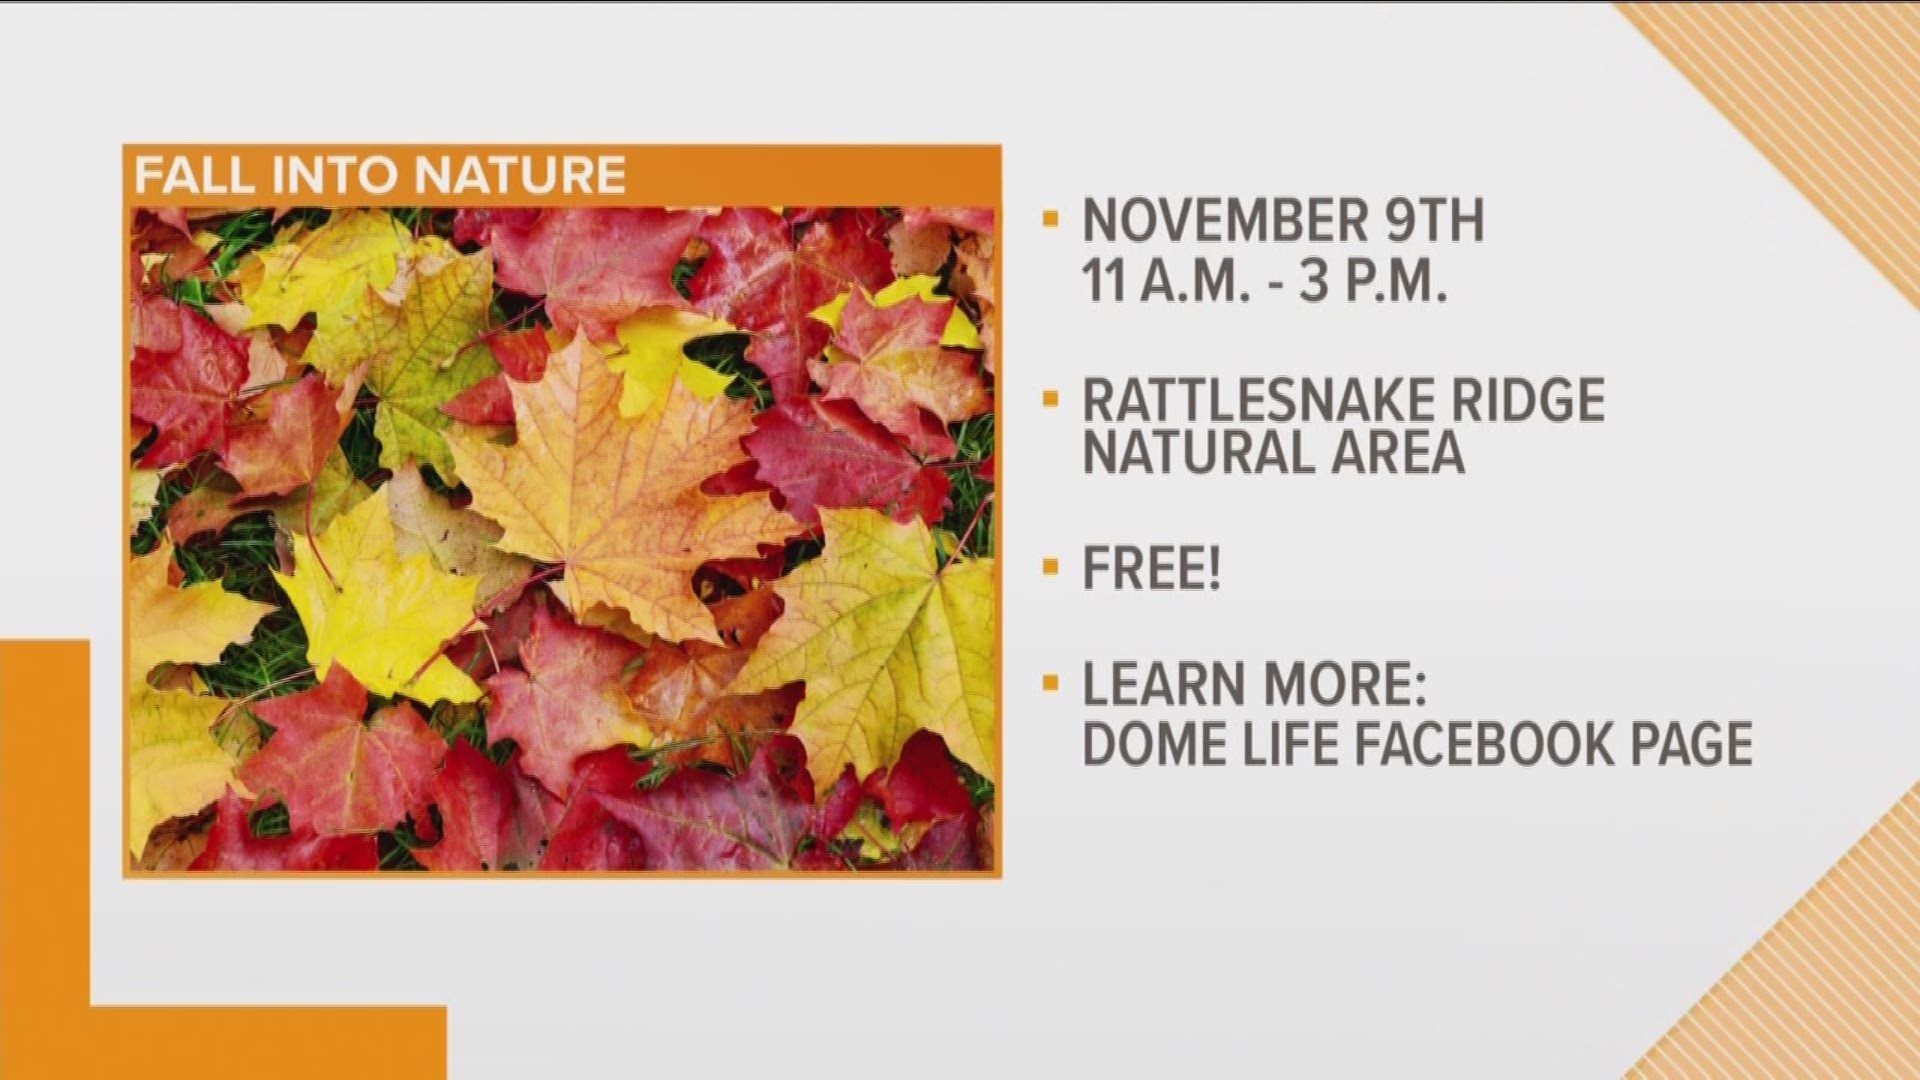 Dome Life and The Nature Conservancy is inviting you to 'Fall into Nature' by exploring the Natural State.